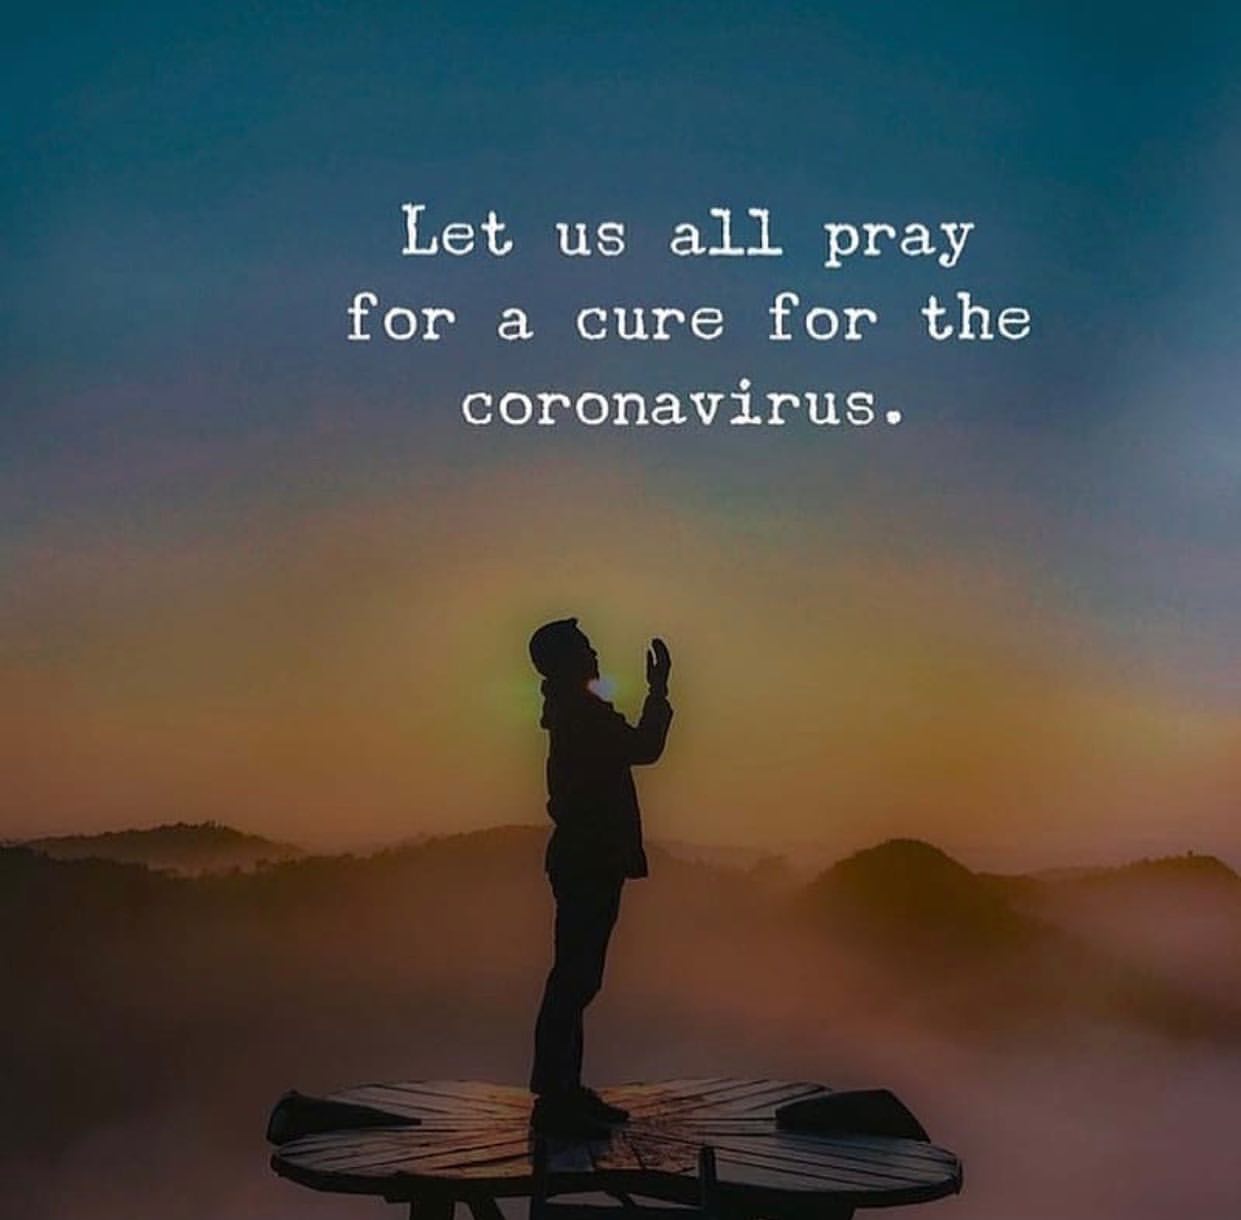 Let us all pray for a cure for the coronavirus.